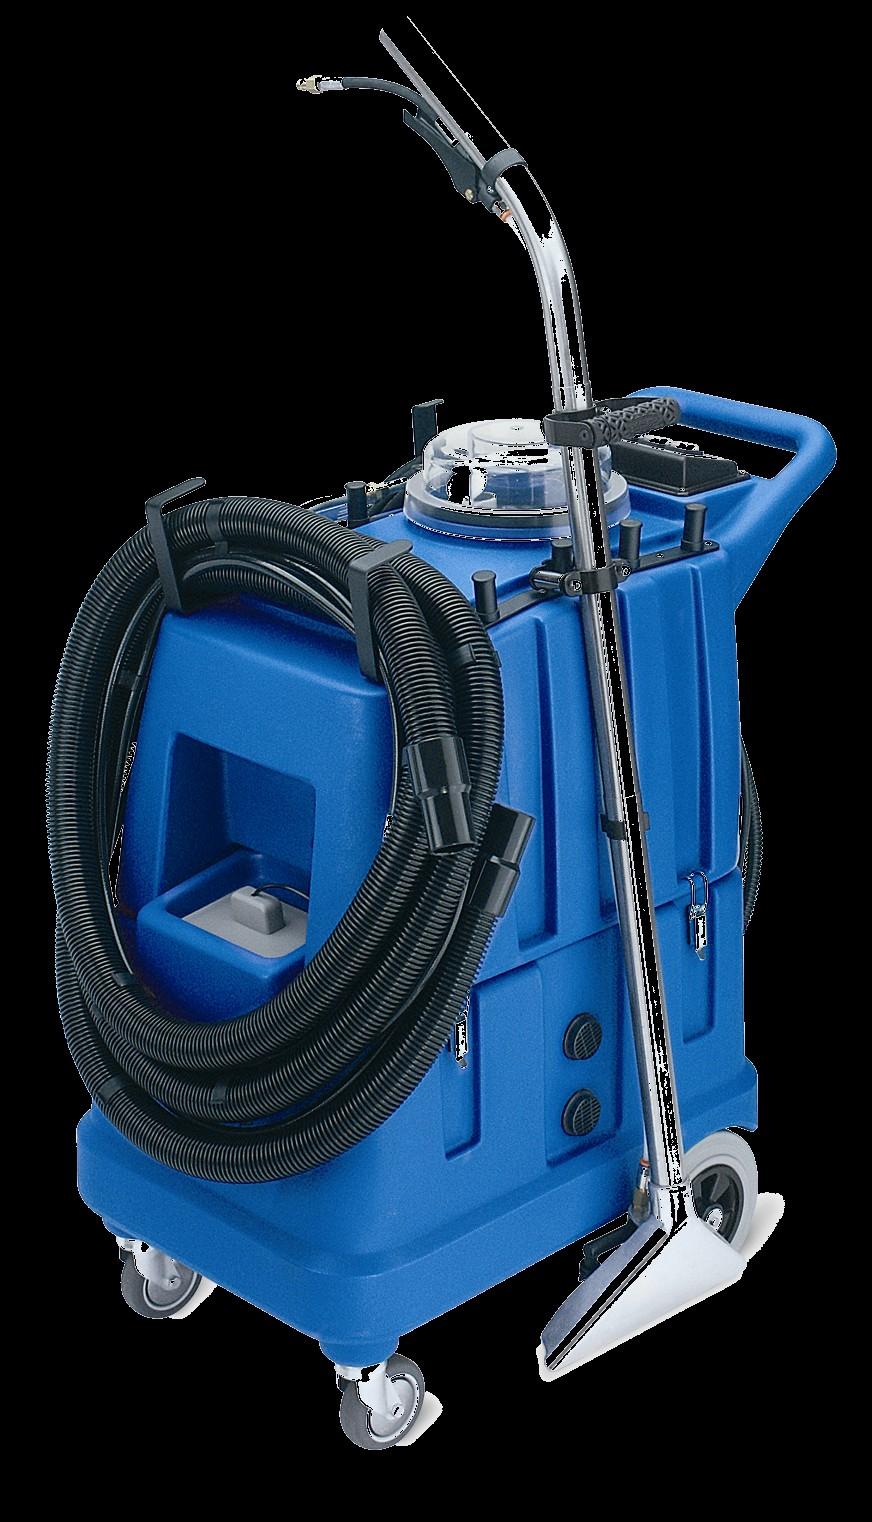 Bo etractors 7 The Sabrina-Mai is a professional machine for cleaning medium areas of carpets.